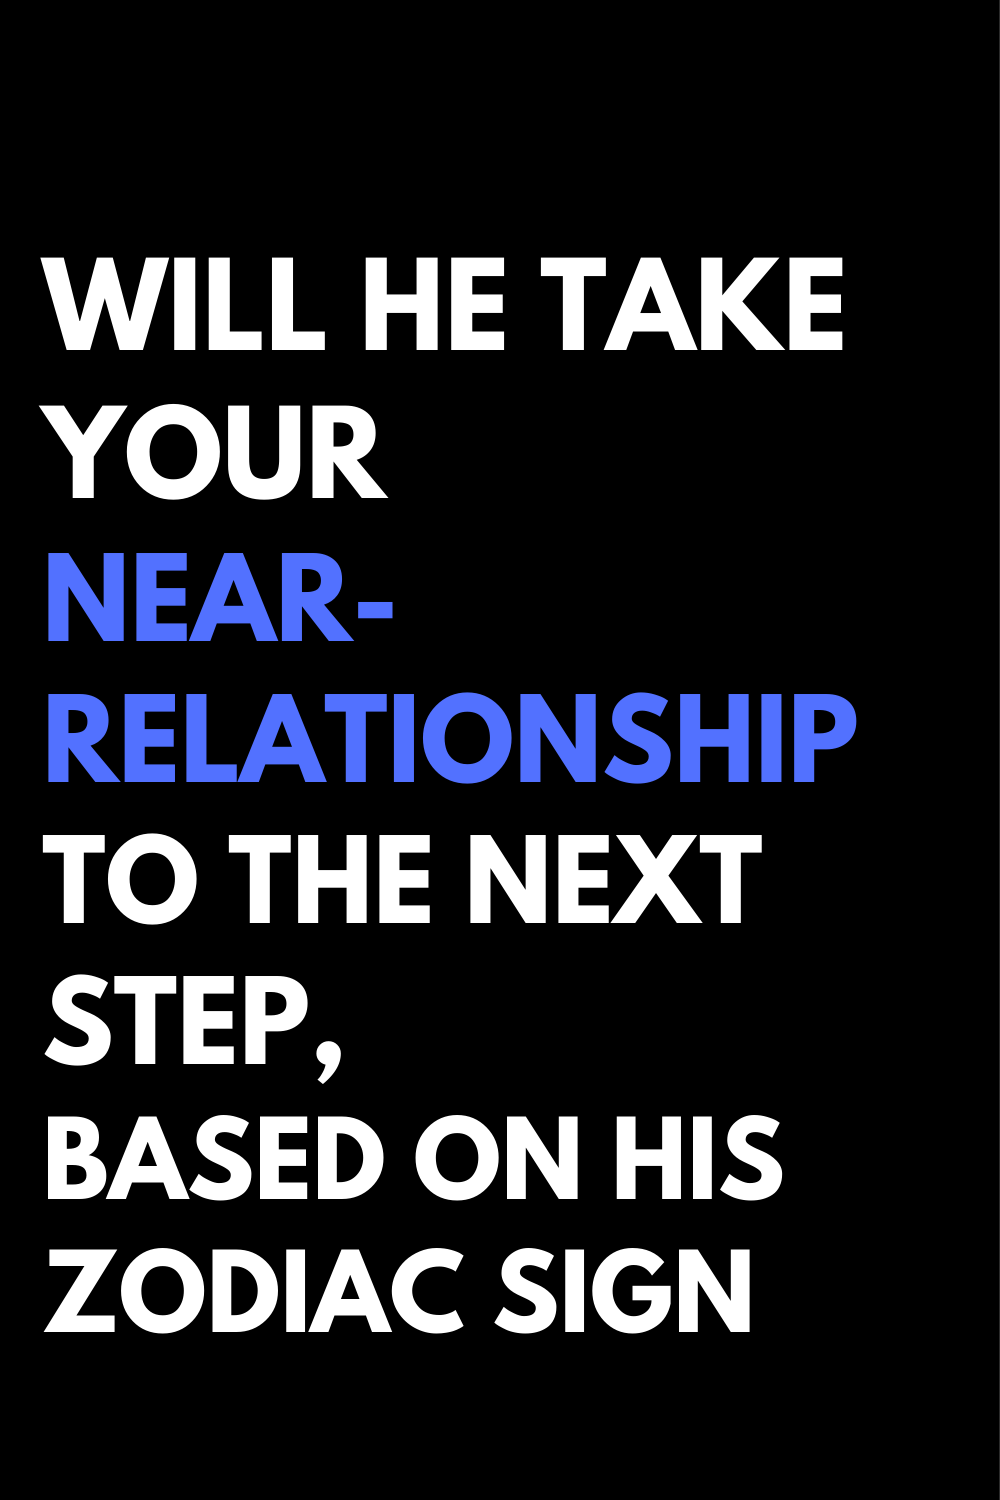 Will He Take Your Near-Relationship To The Next Step, Based On His Zodiac Sign